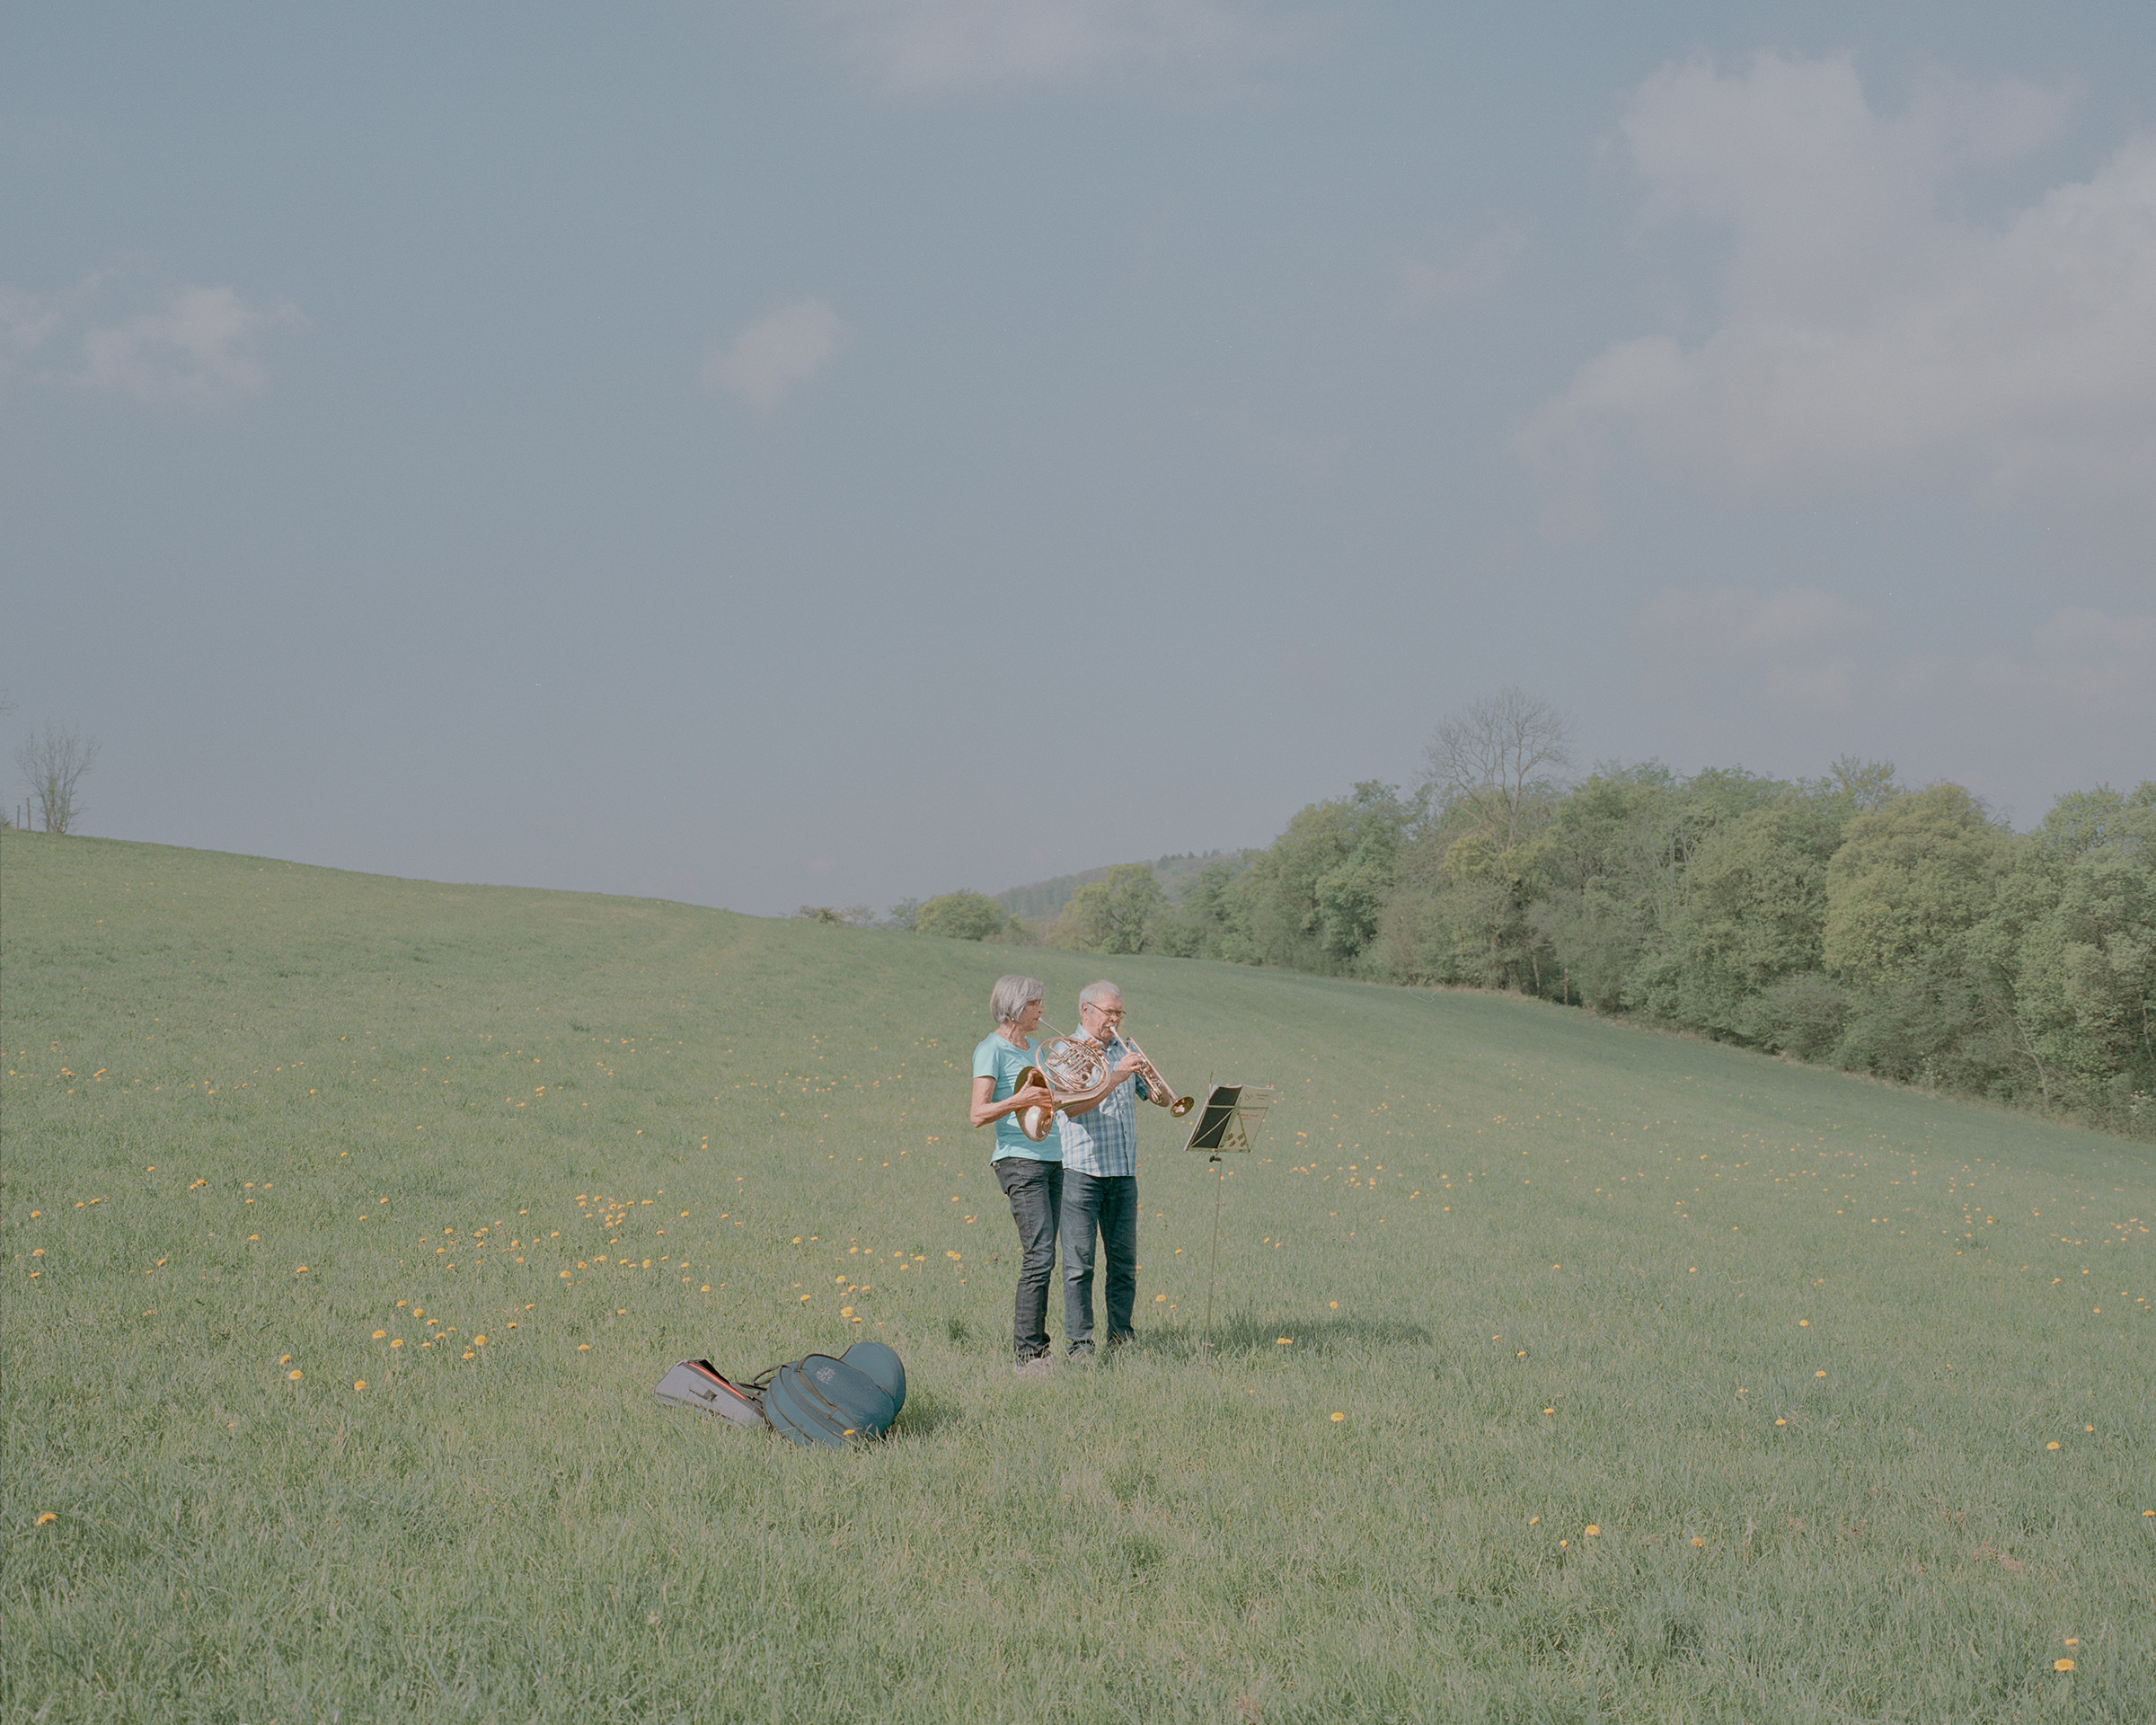 Andrea and Rainer Zube, pictured here on April 19, play in a meadow.